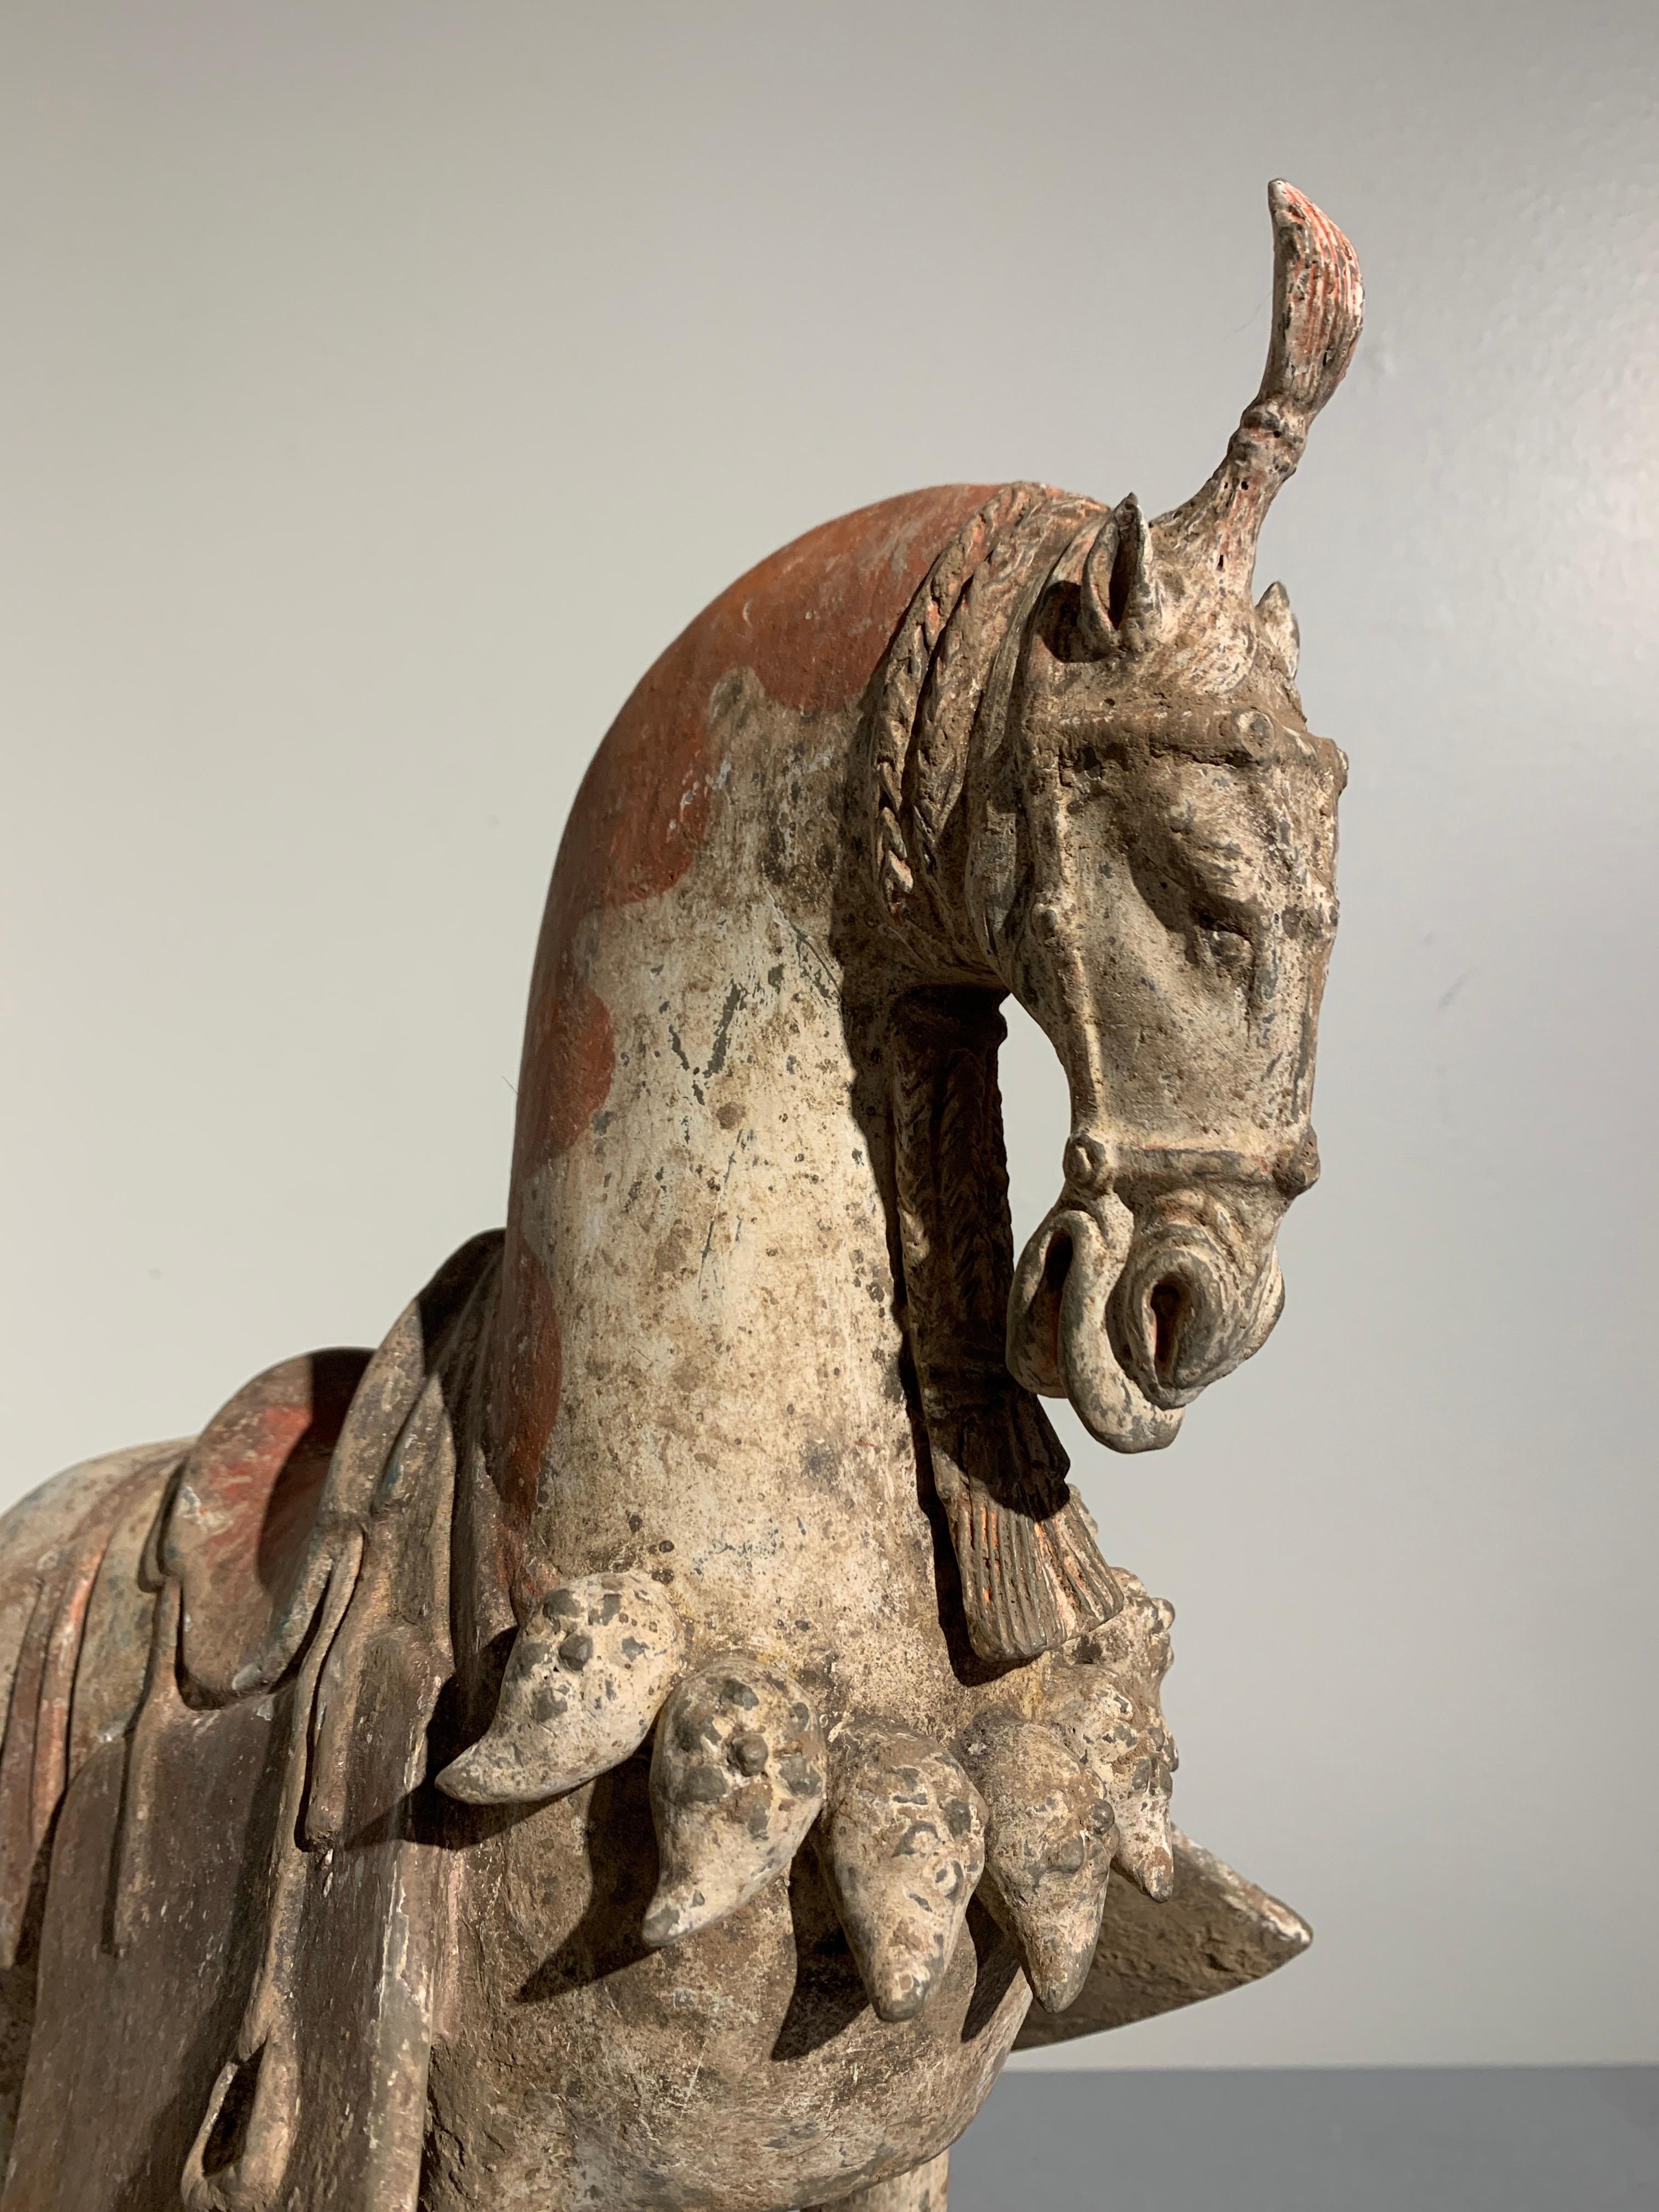 Terracotta Chinese Painted Pottery Caparisoned Horse, Northern Wei Dynasty '386-534'